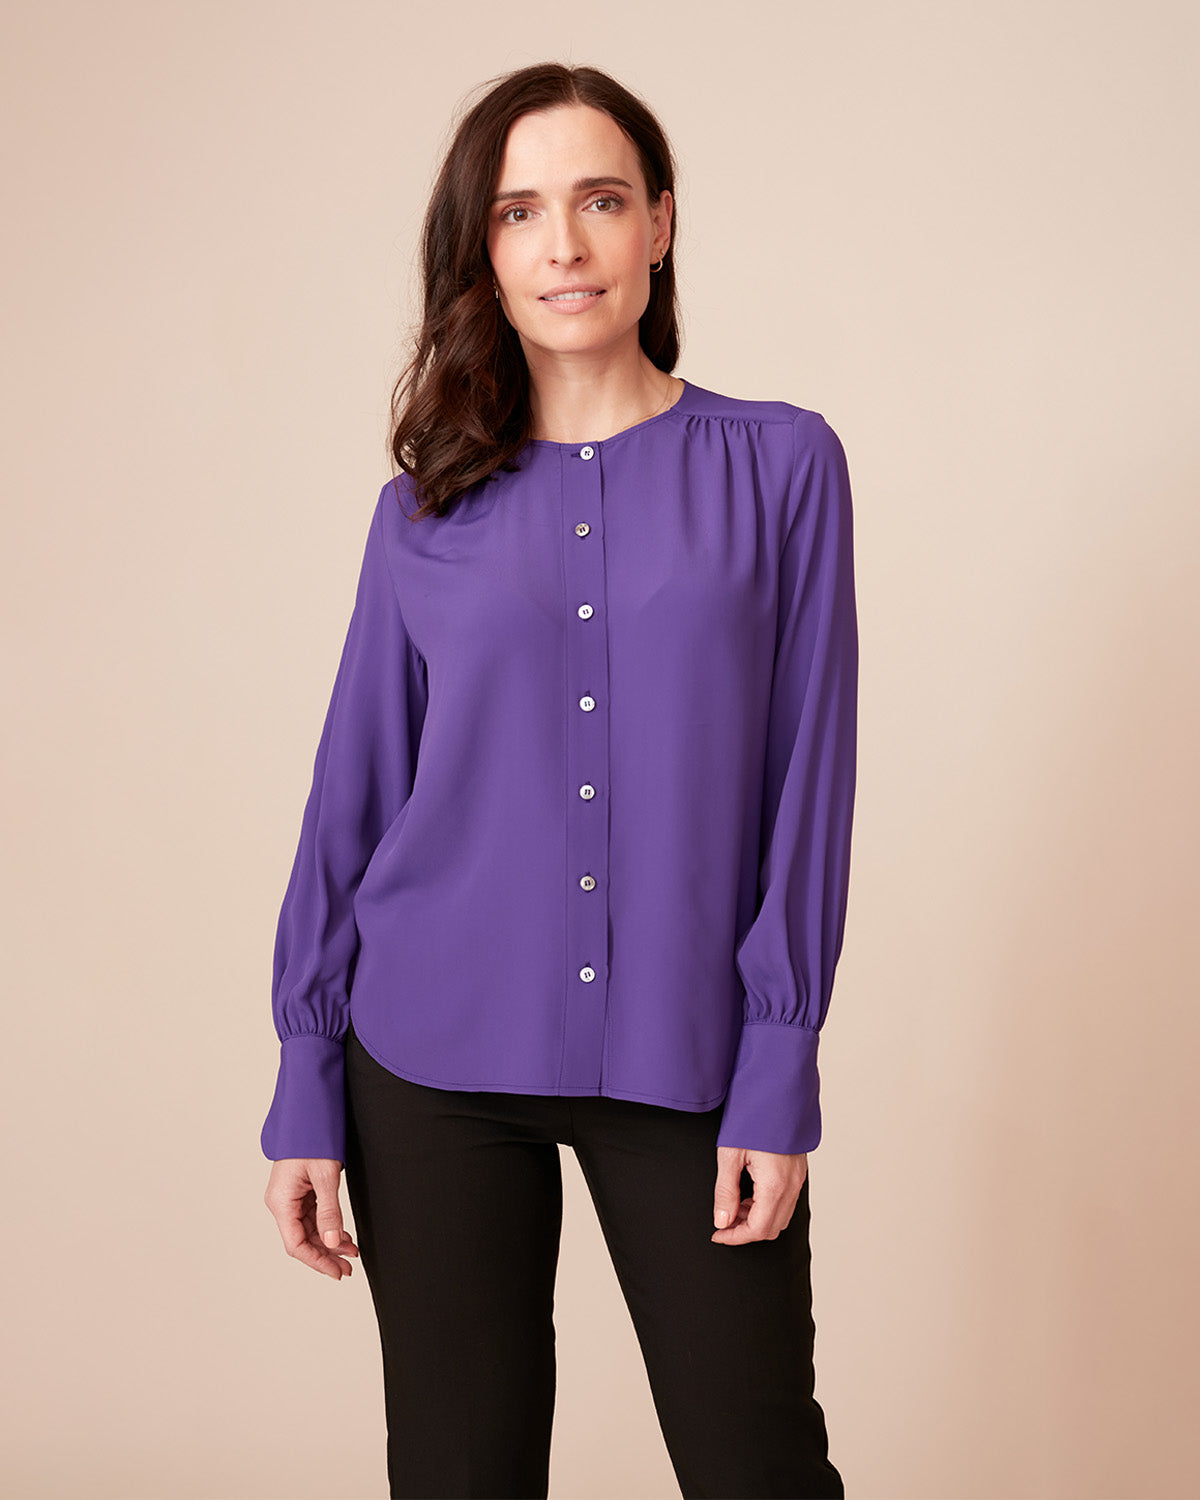 "#color_Amethyst|Daphne is 5'9", wearing a size S